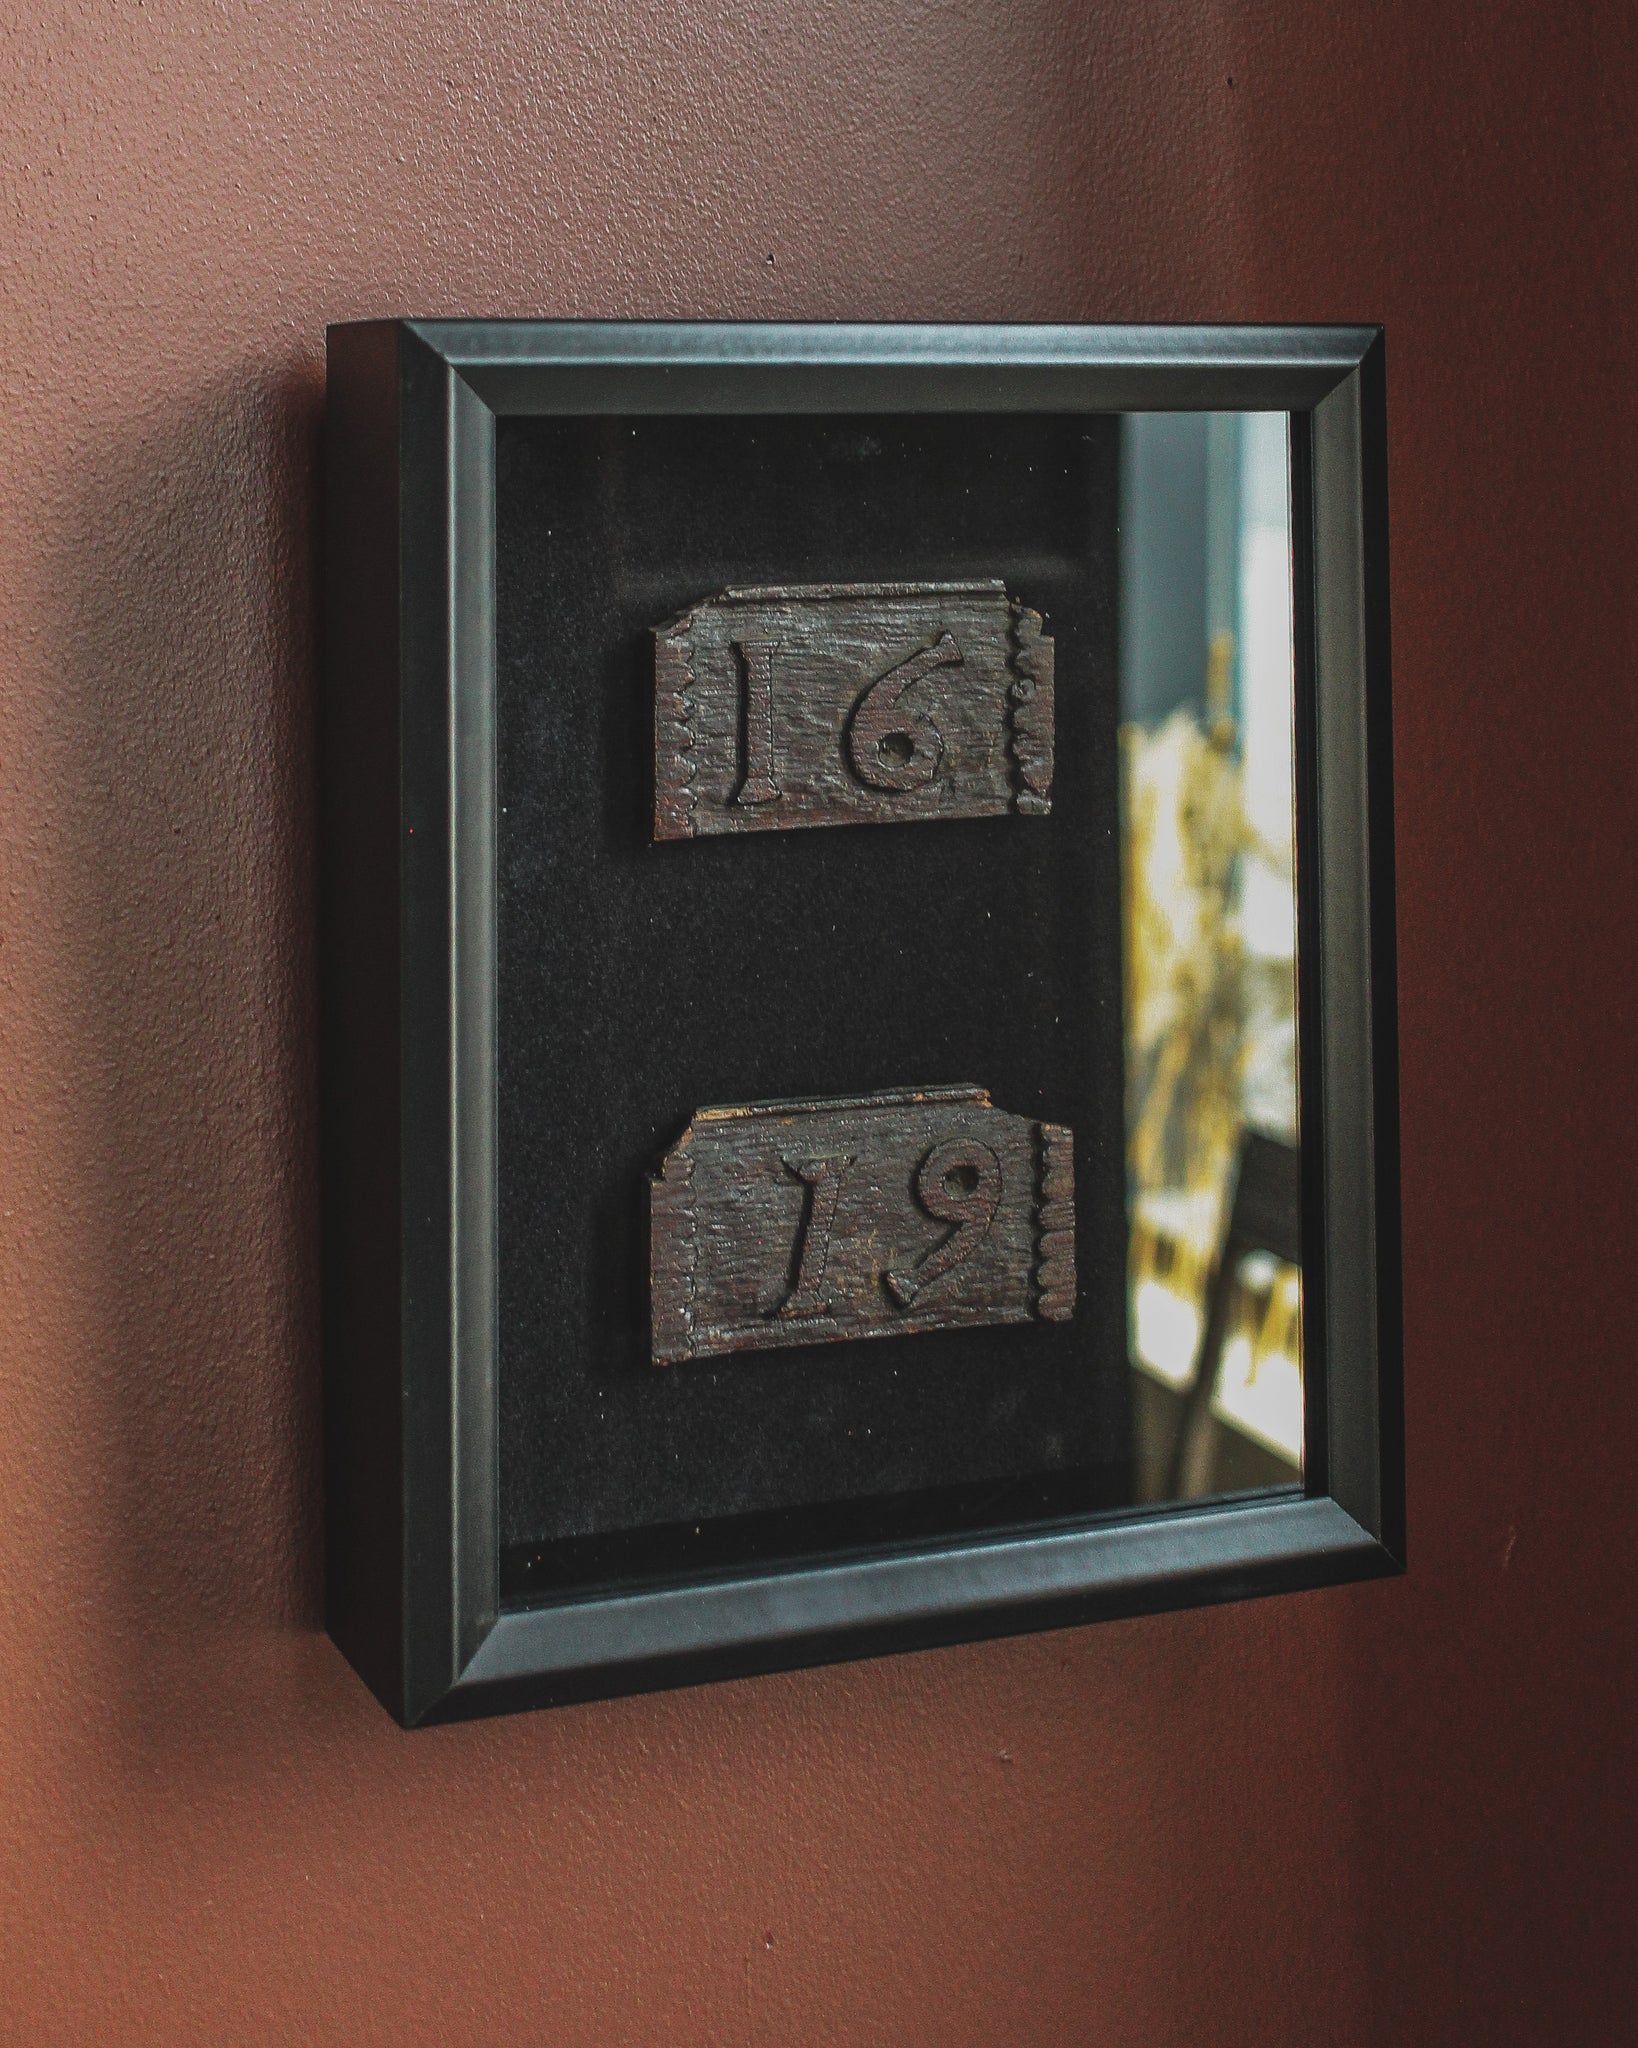 “1619” Carved Date Plate in Shadowbox